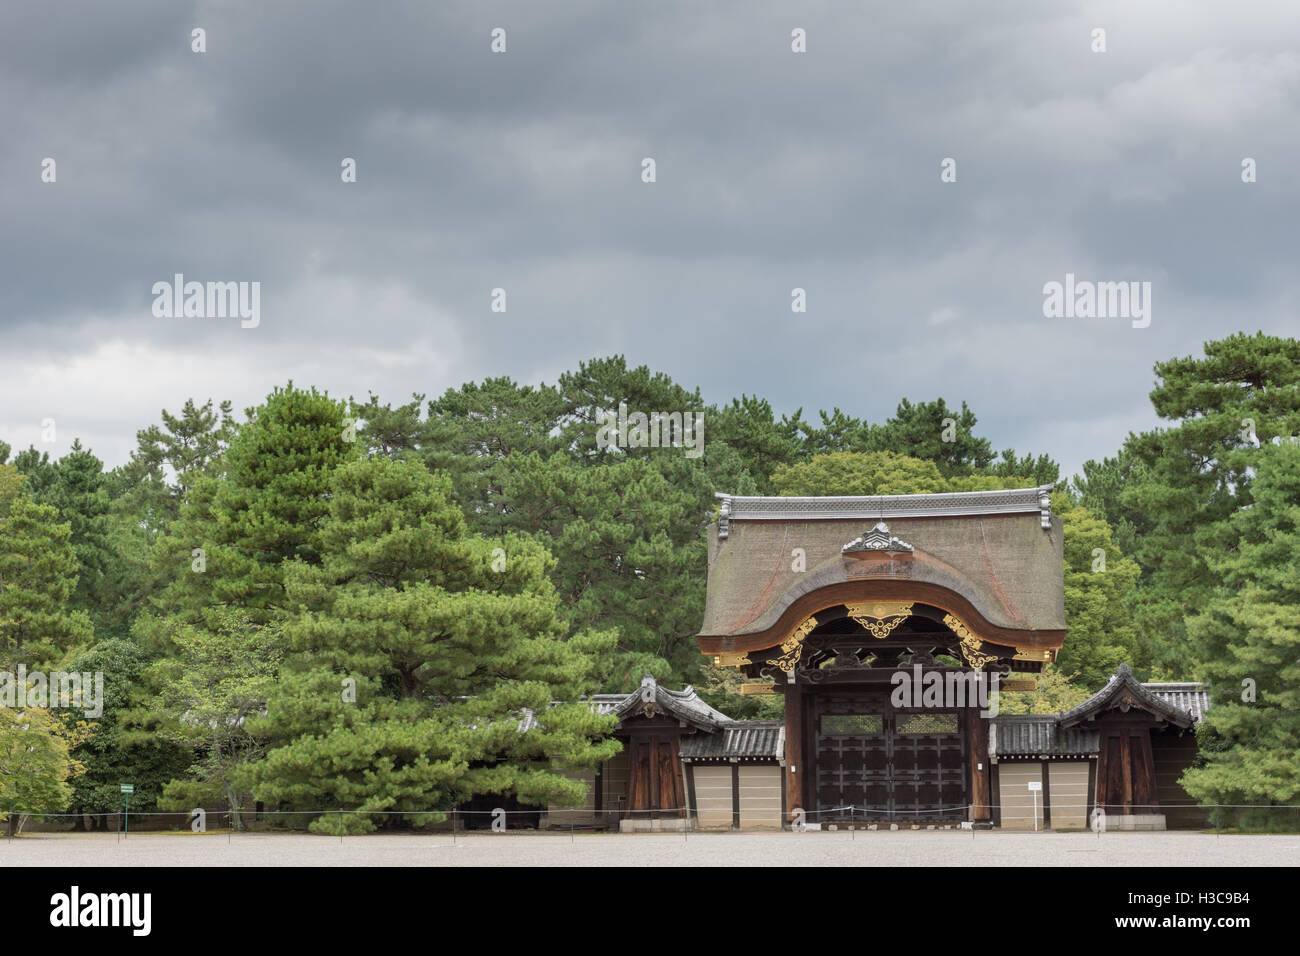 Kenshun-mon Gate of Imperial Palace. Stock Photo